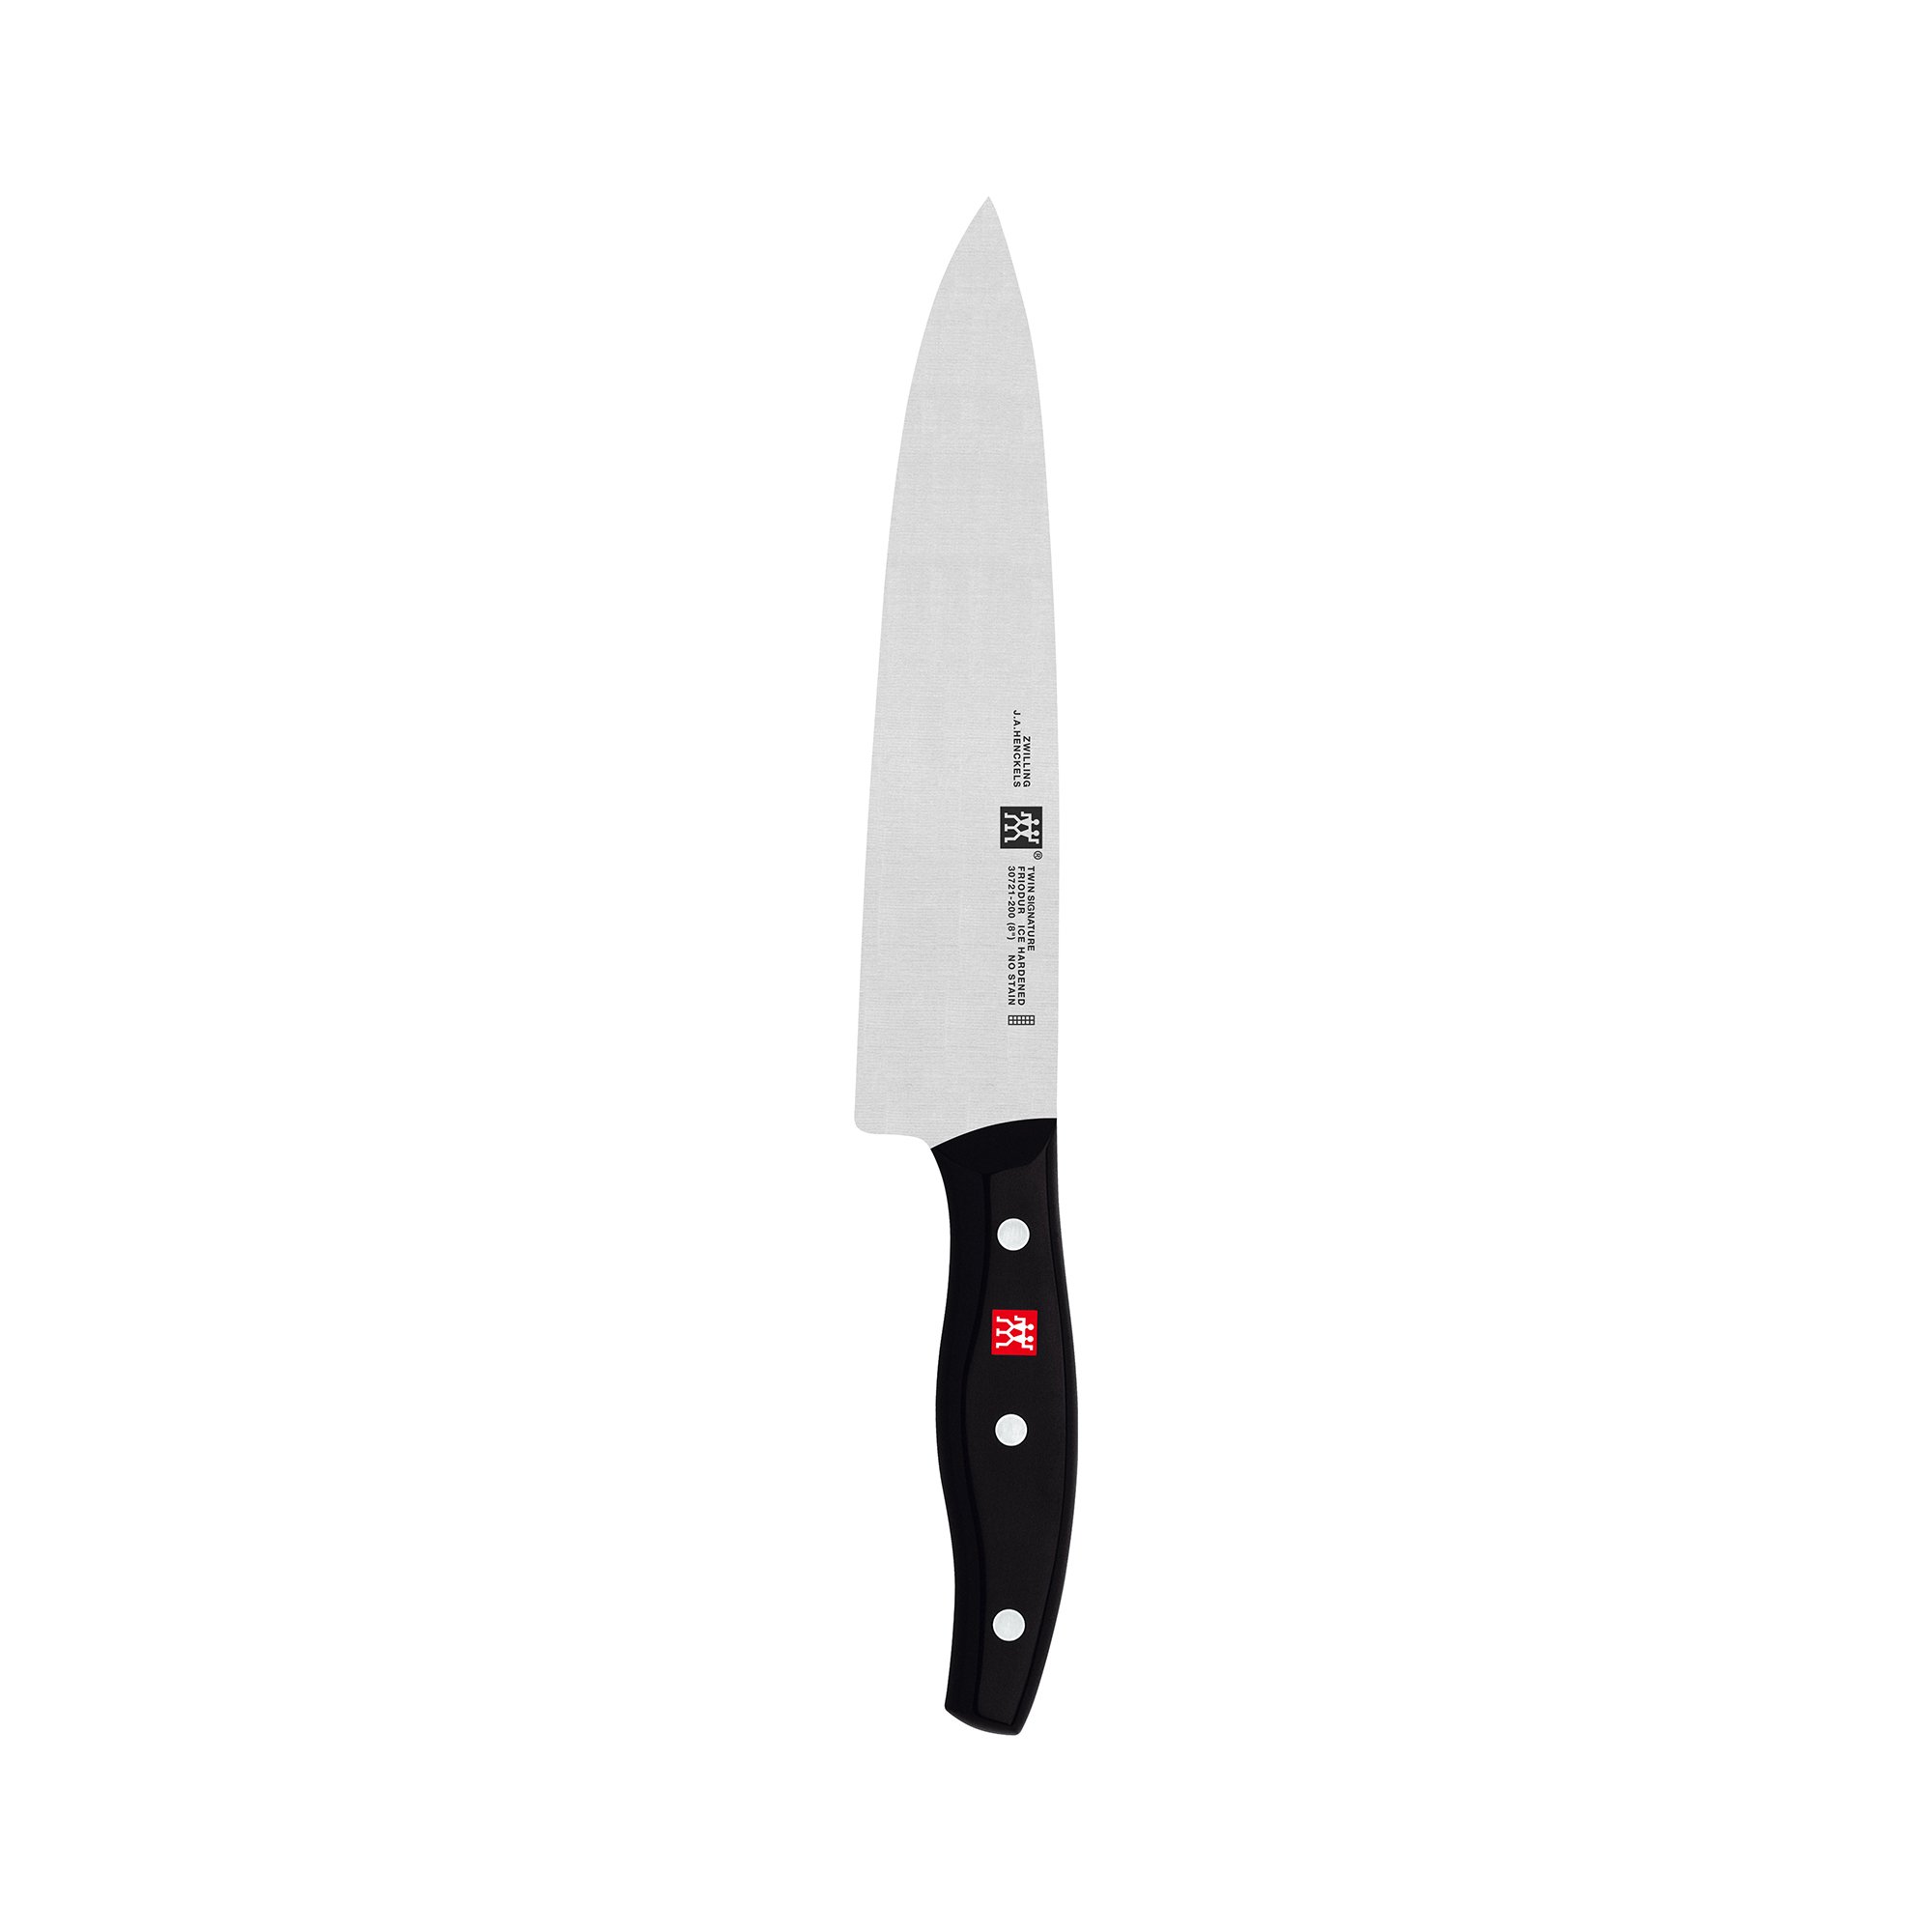 8" Zwilling J.A. Henckels Twin Signature Chef Knife (Made in Germany) $42 + Free Shipping